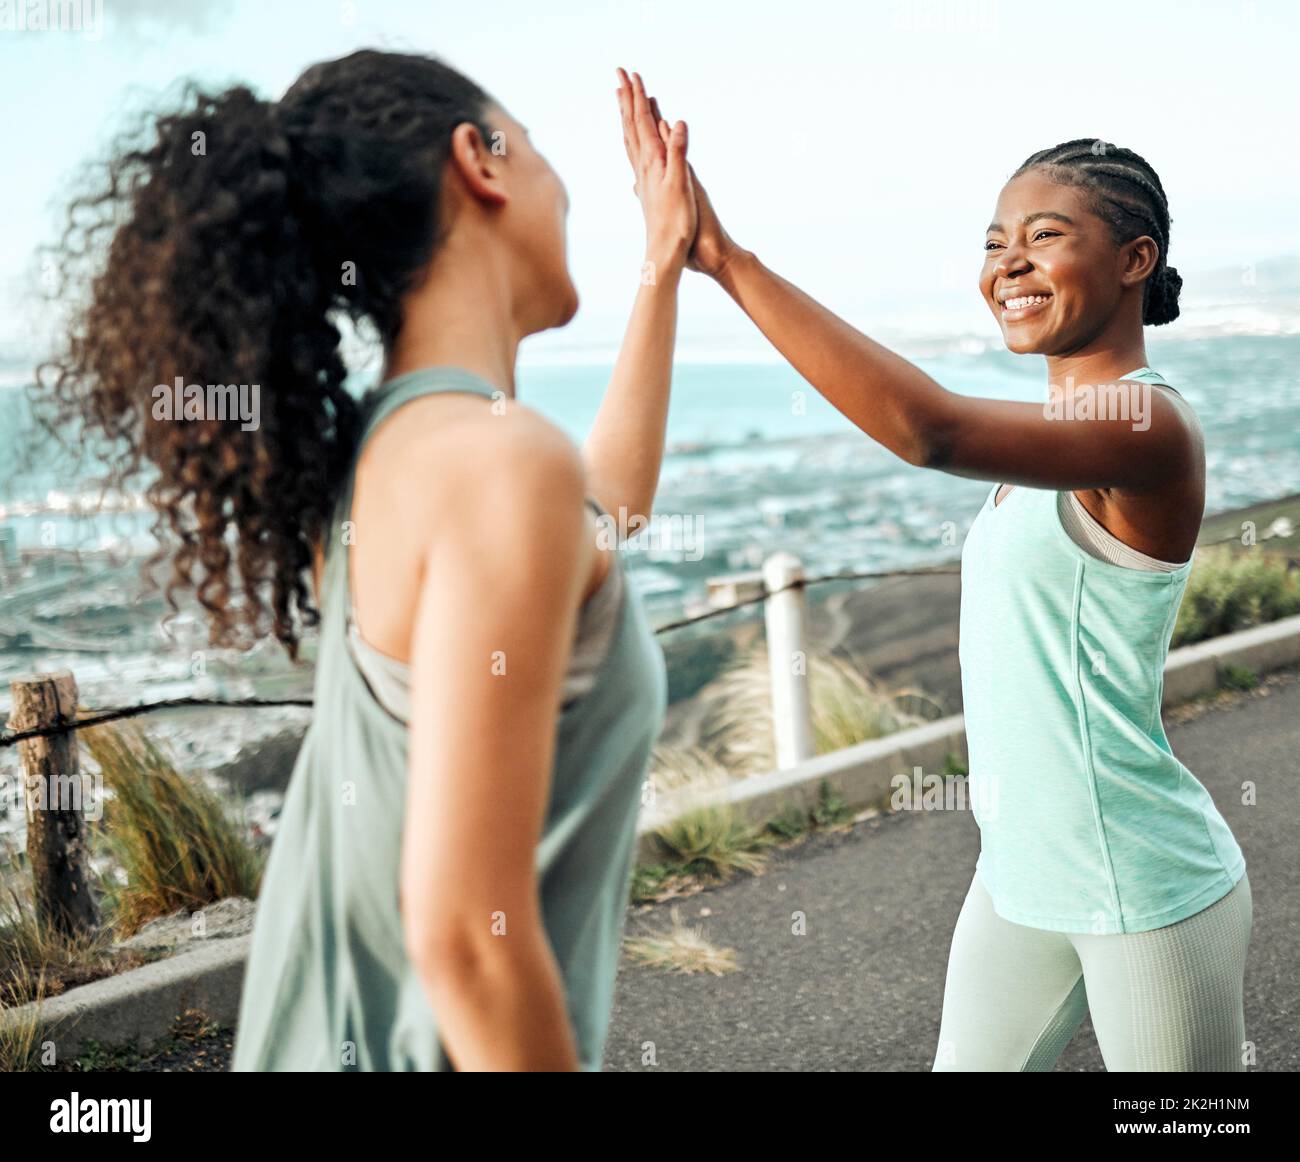 We reached another fitness goal. Shot of two young women giving each other a high five while working out in nature. Stock Photo